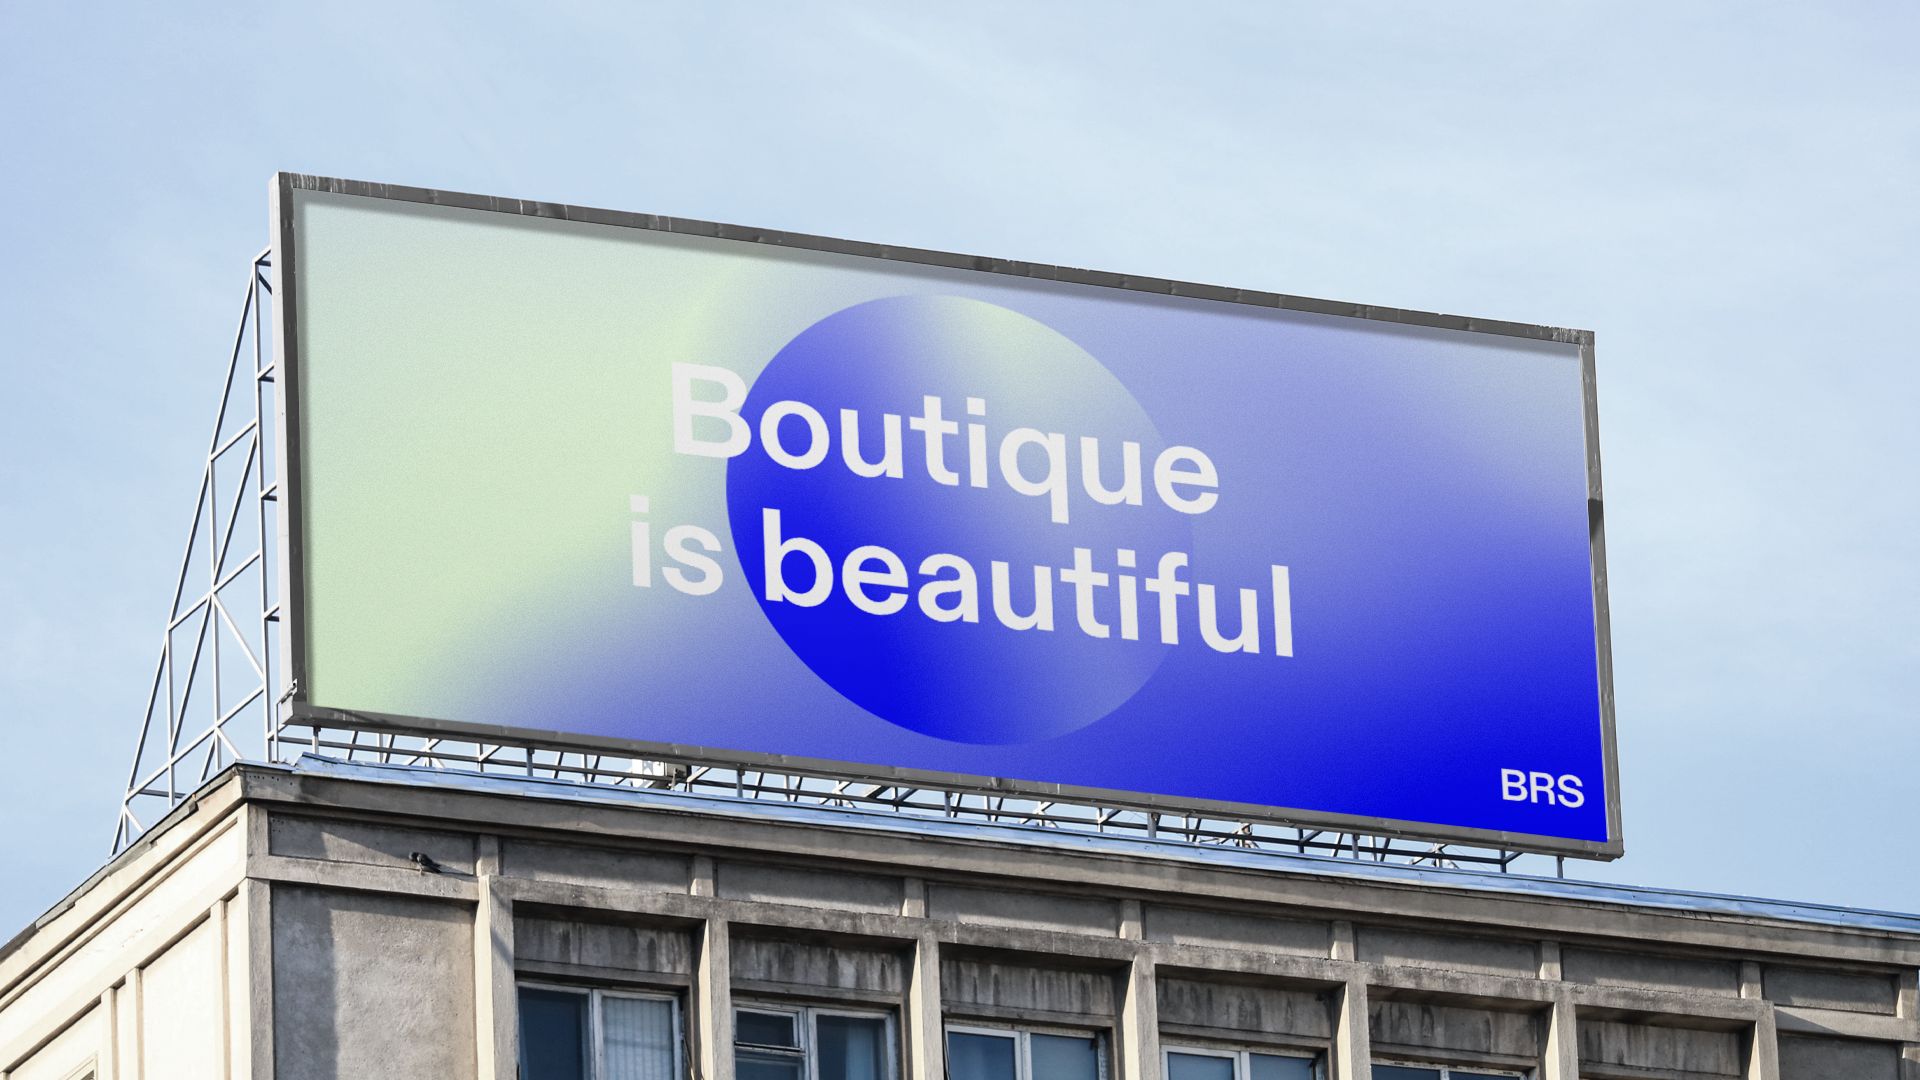 A billboard showing a blue/mint gradient and the statement "Boutique is beautiful"